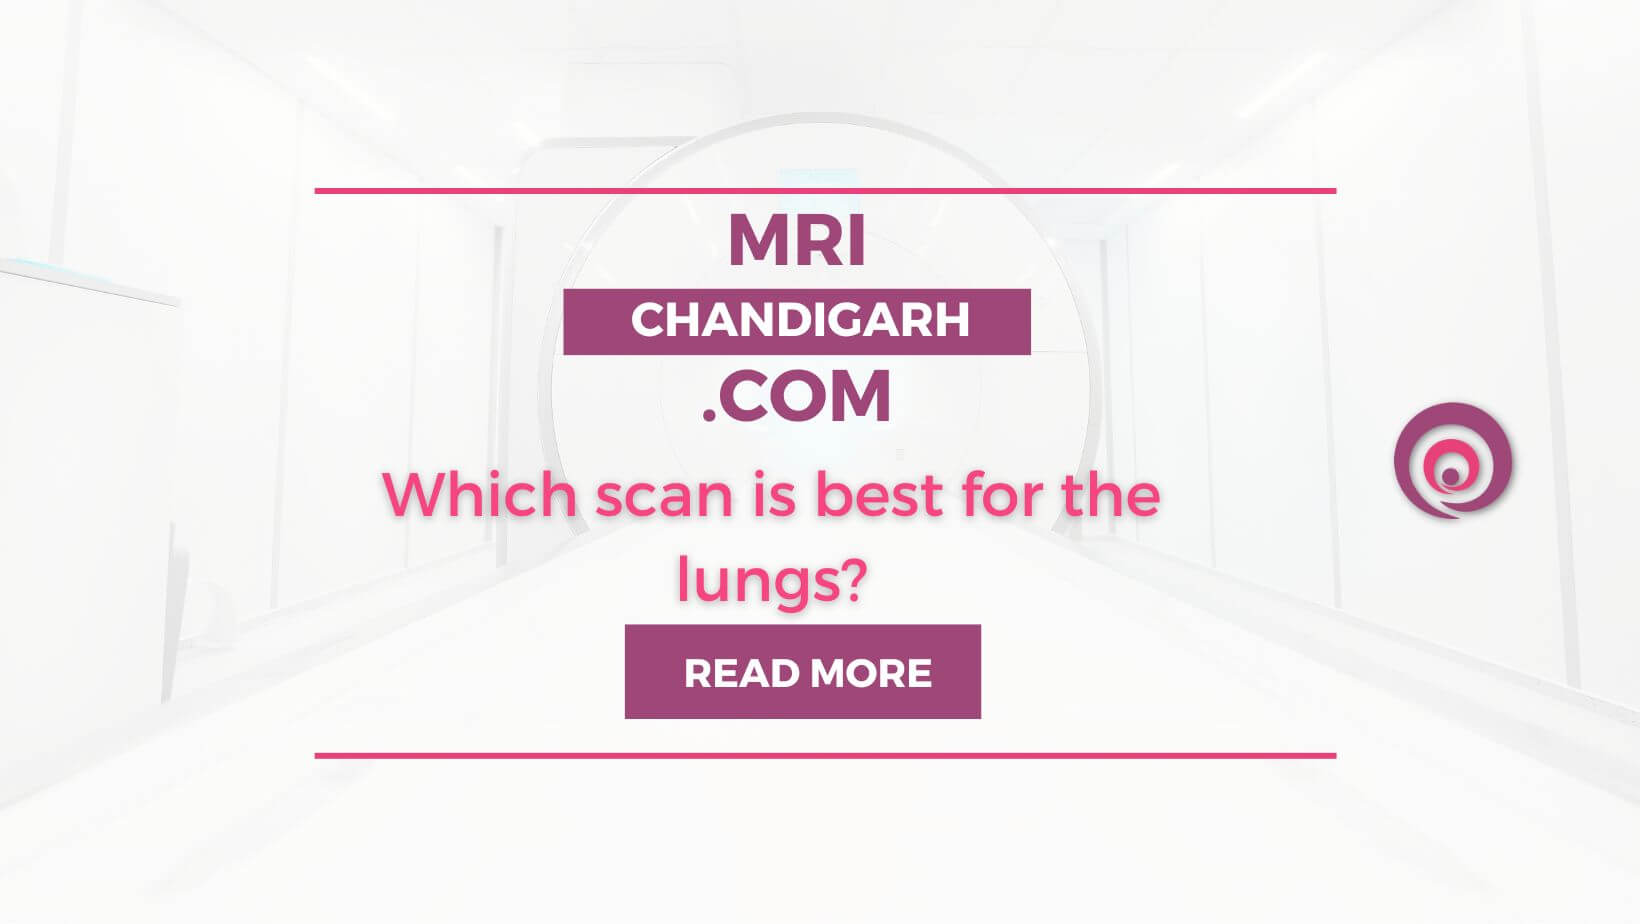 Which scan is best for the lungs?